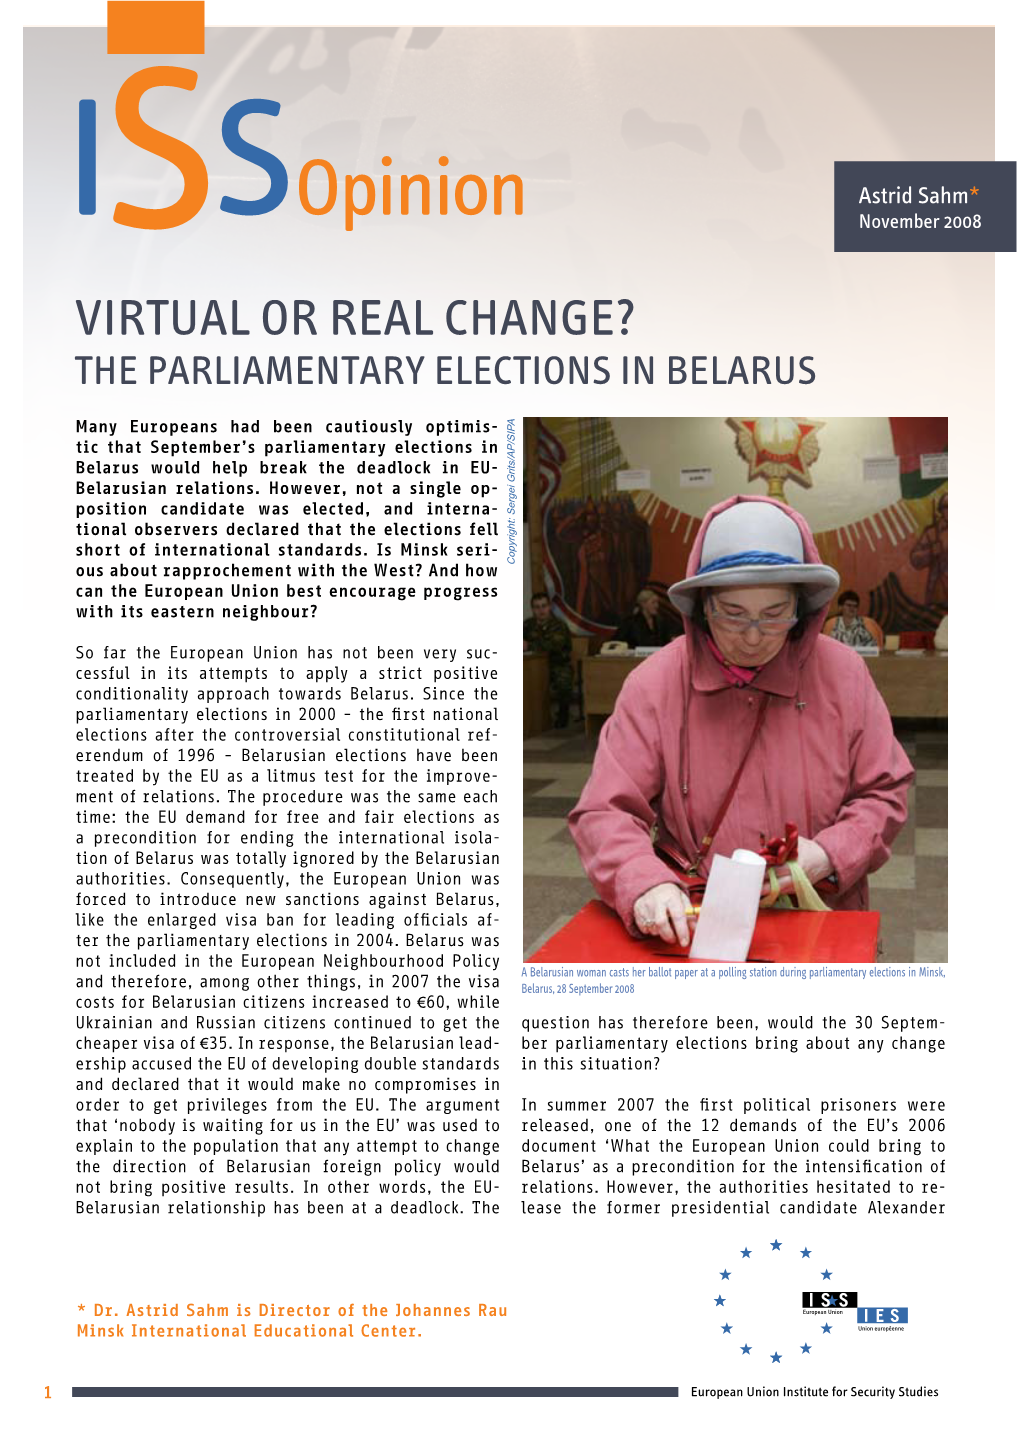 Issopinion November 2008 Virtual Or Real Change? the Parliamentary Elections in Belarus